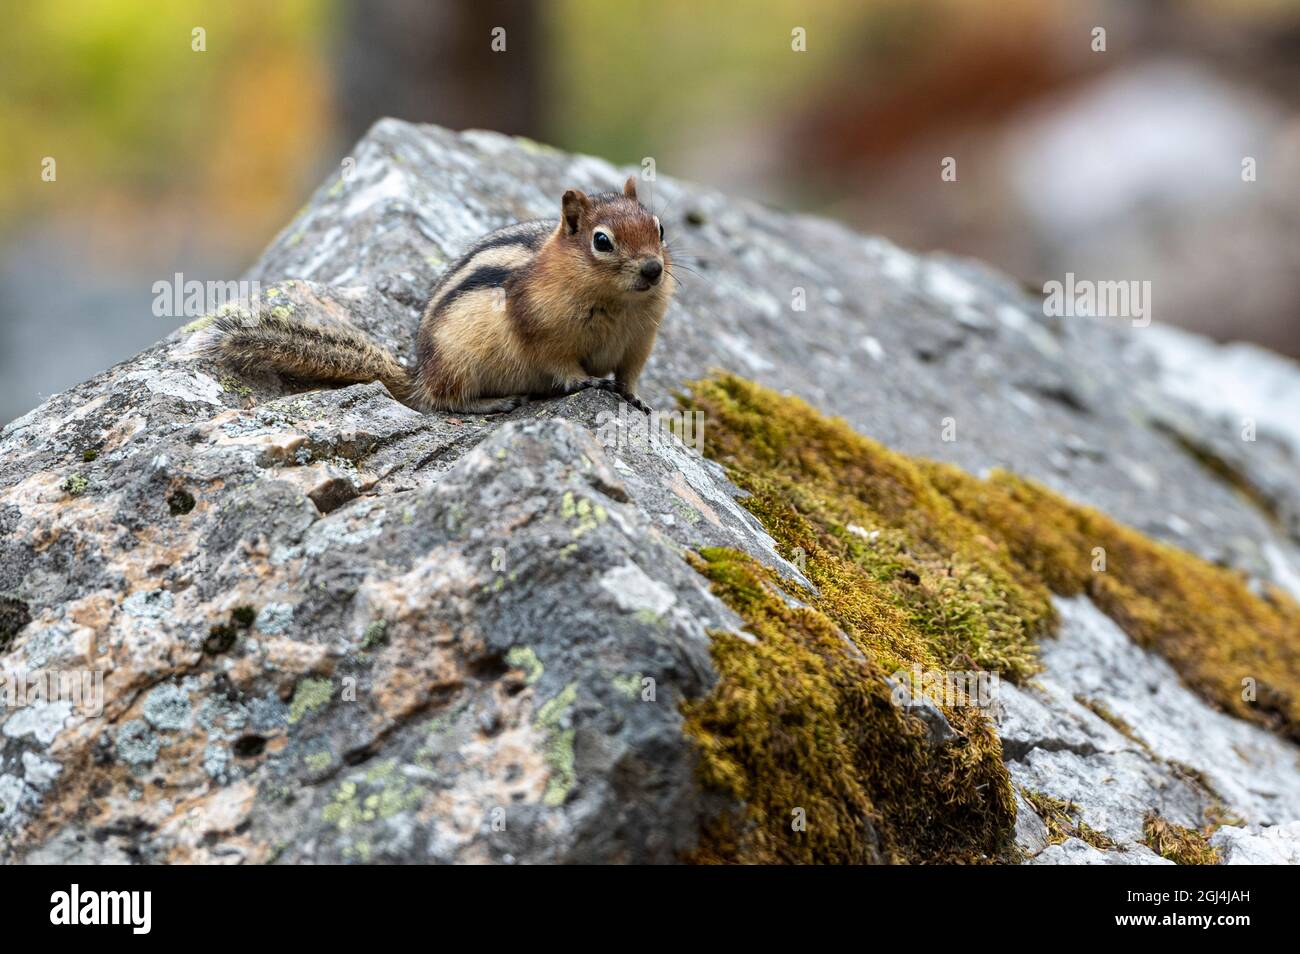 Golden-mantled ground squirrel (Spermophilus lateralis) Plain of the Six Glaciers Tea House, Banff Nationala Park, Lake Louise, Alberta, Canada, Stock Photo